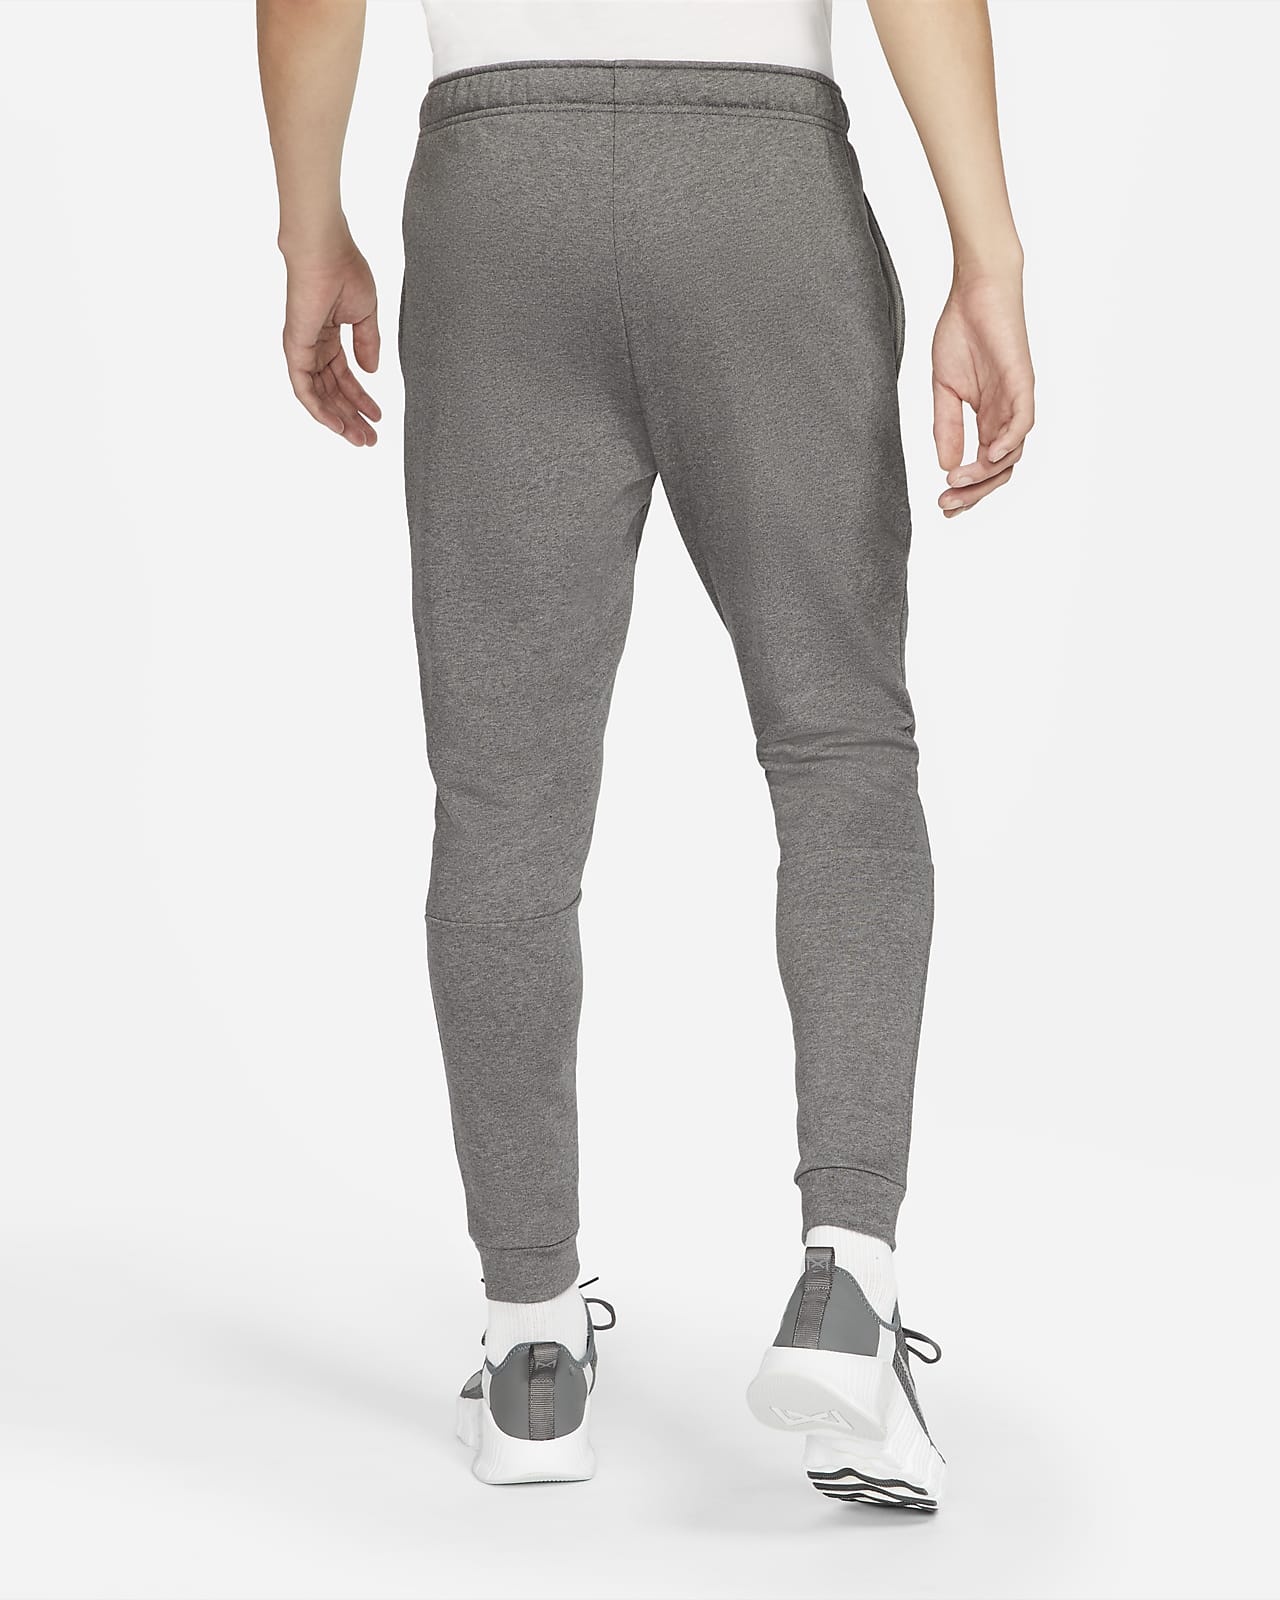 Sweats & The City's Workout Essentials